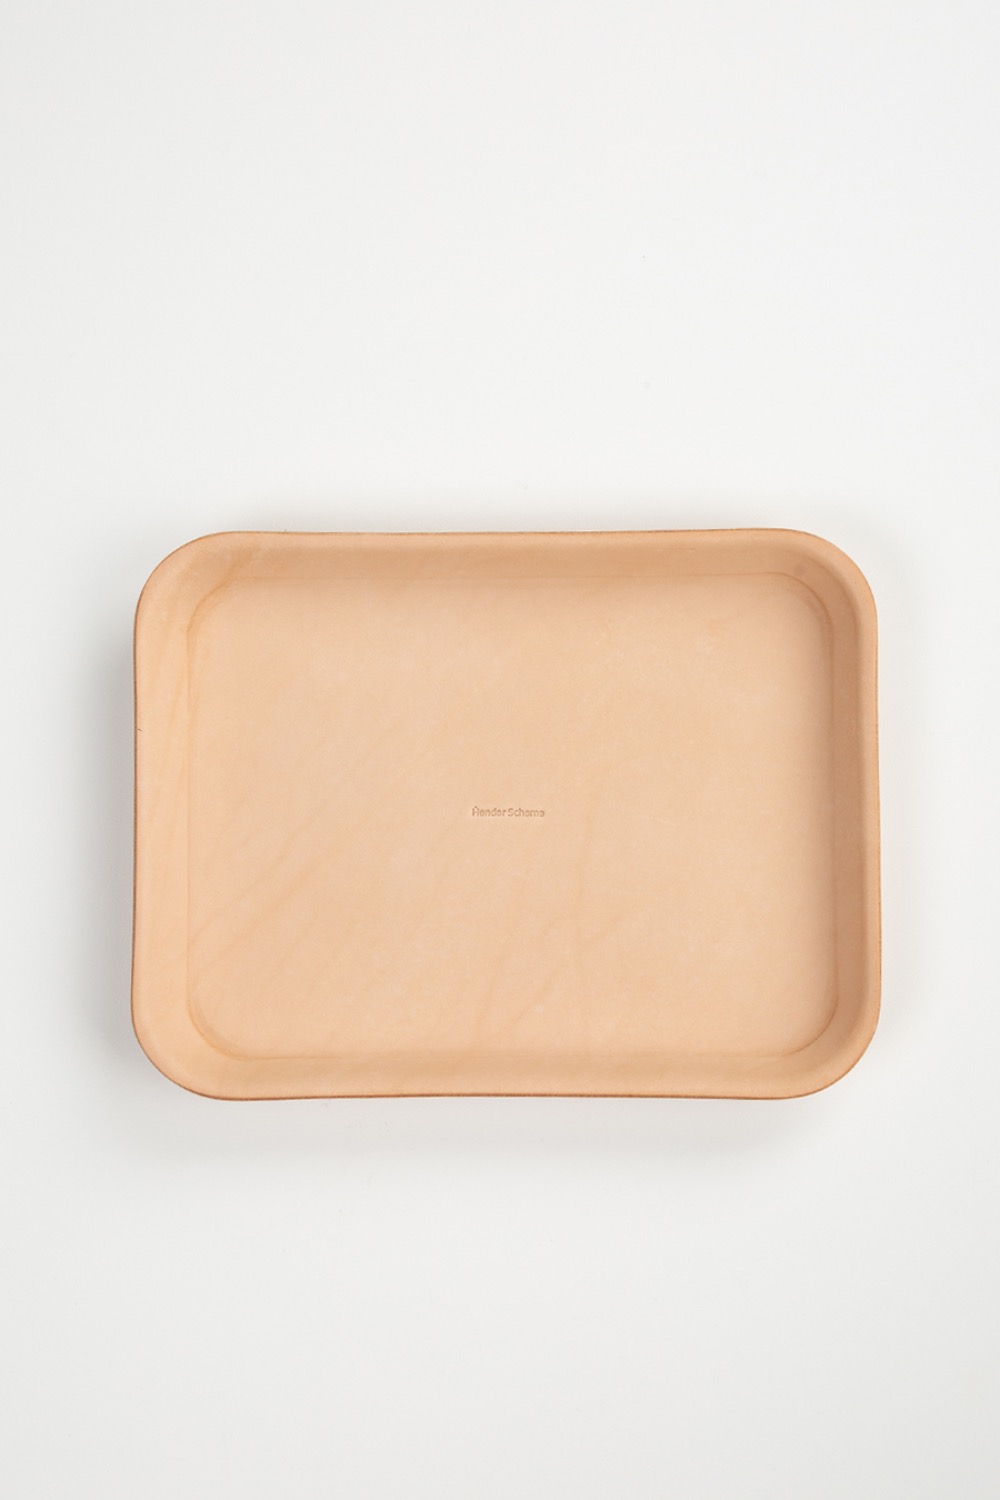 NK-RC-LTM - LEATHER TRAY M NATURAL